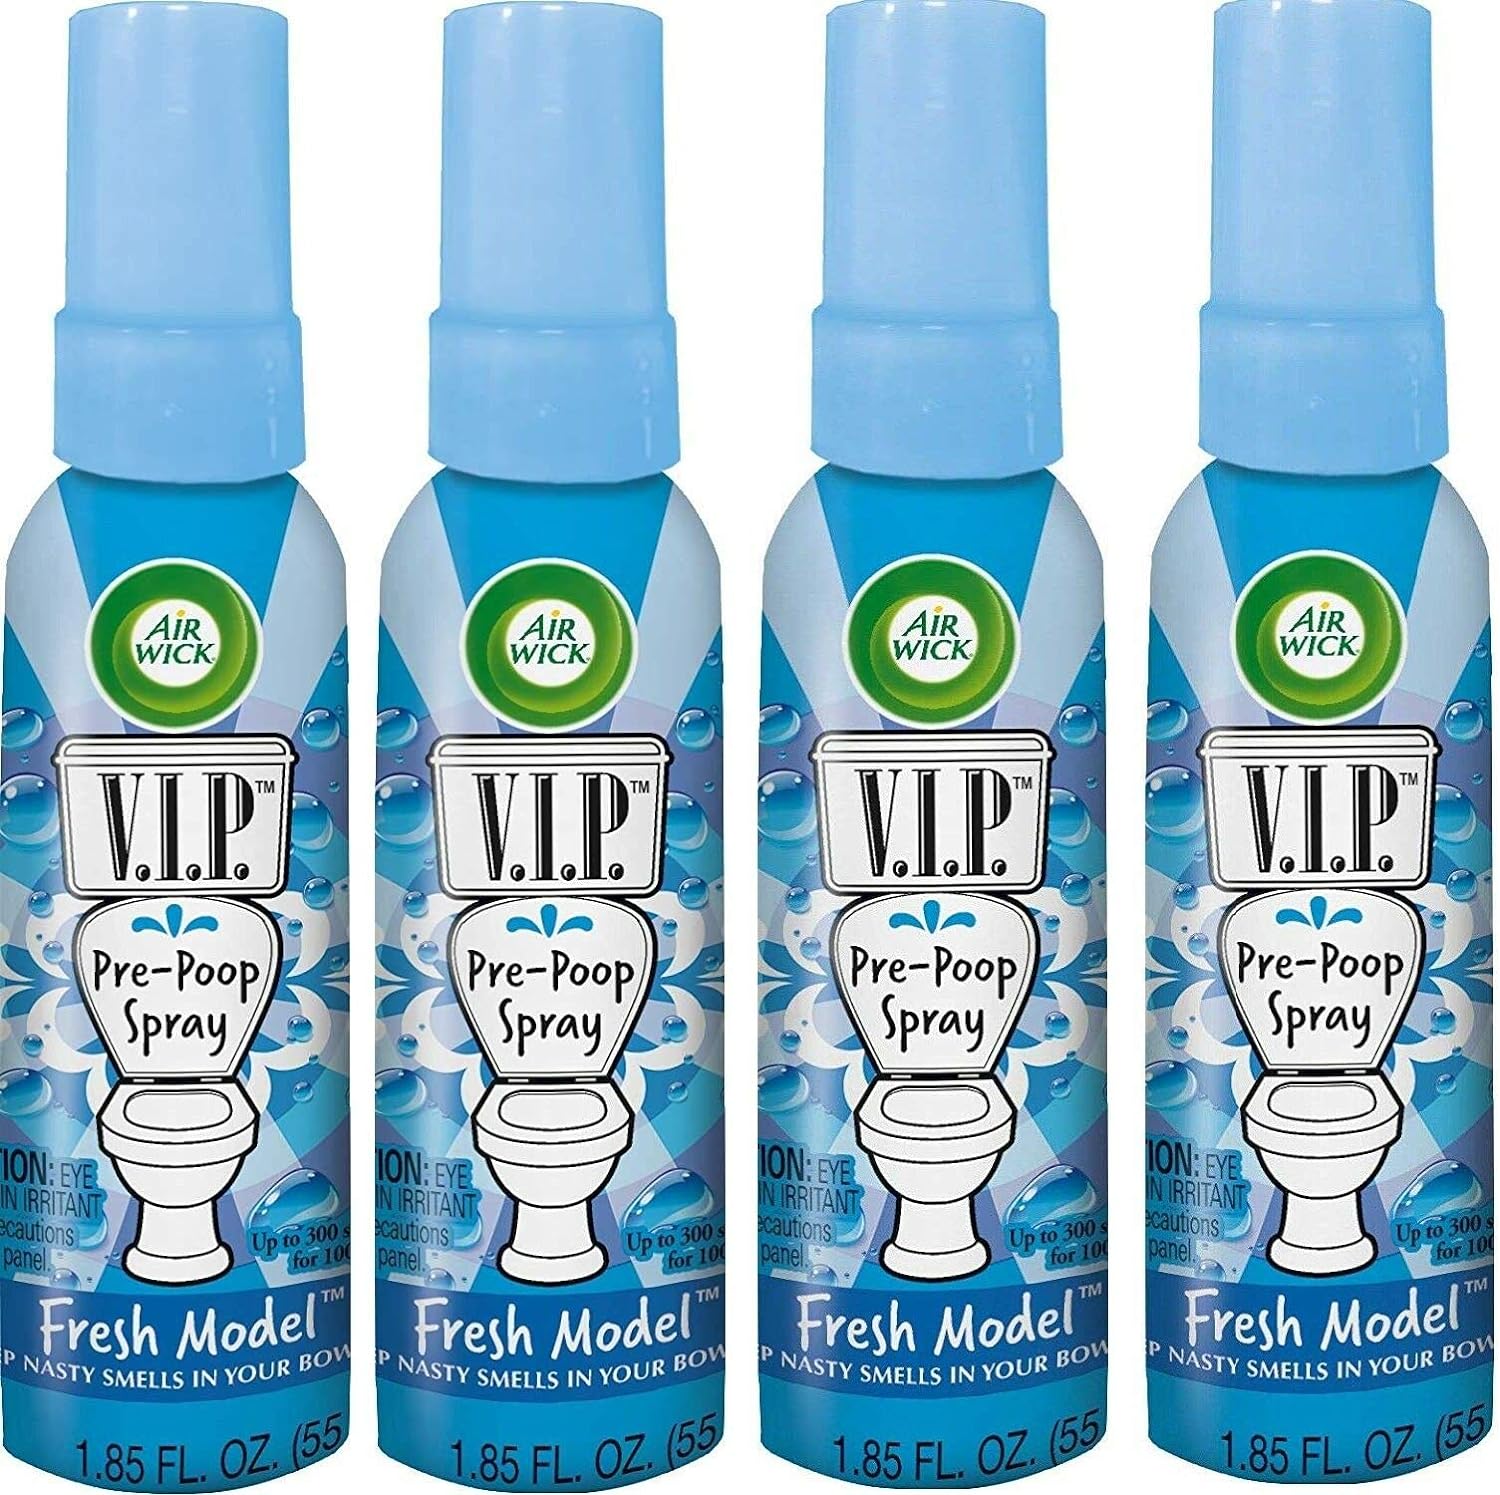 Air Wick V.I.P. Pre-Poop Toilet Spray | Rosy Starlet Scent | Contains Essential Oils | Travel Size Air Freshener | Up to 100 uses - 1.85 Ounce (Pack of 4)